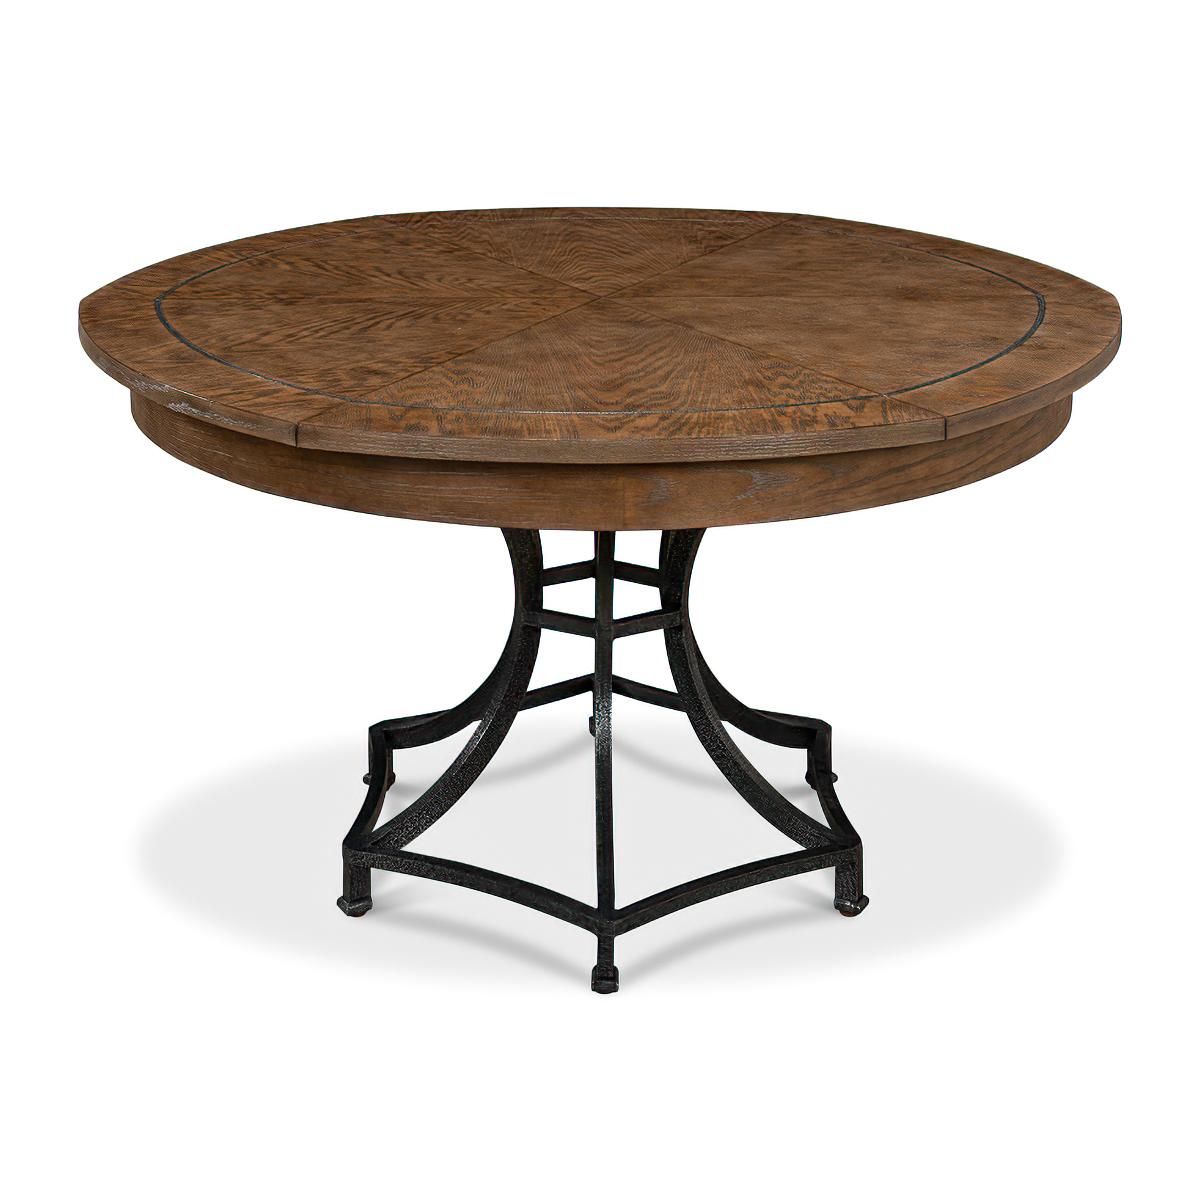 Asian Modern Industrial Round Dining Table - Oak For Sale